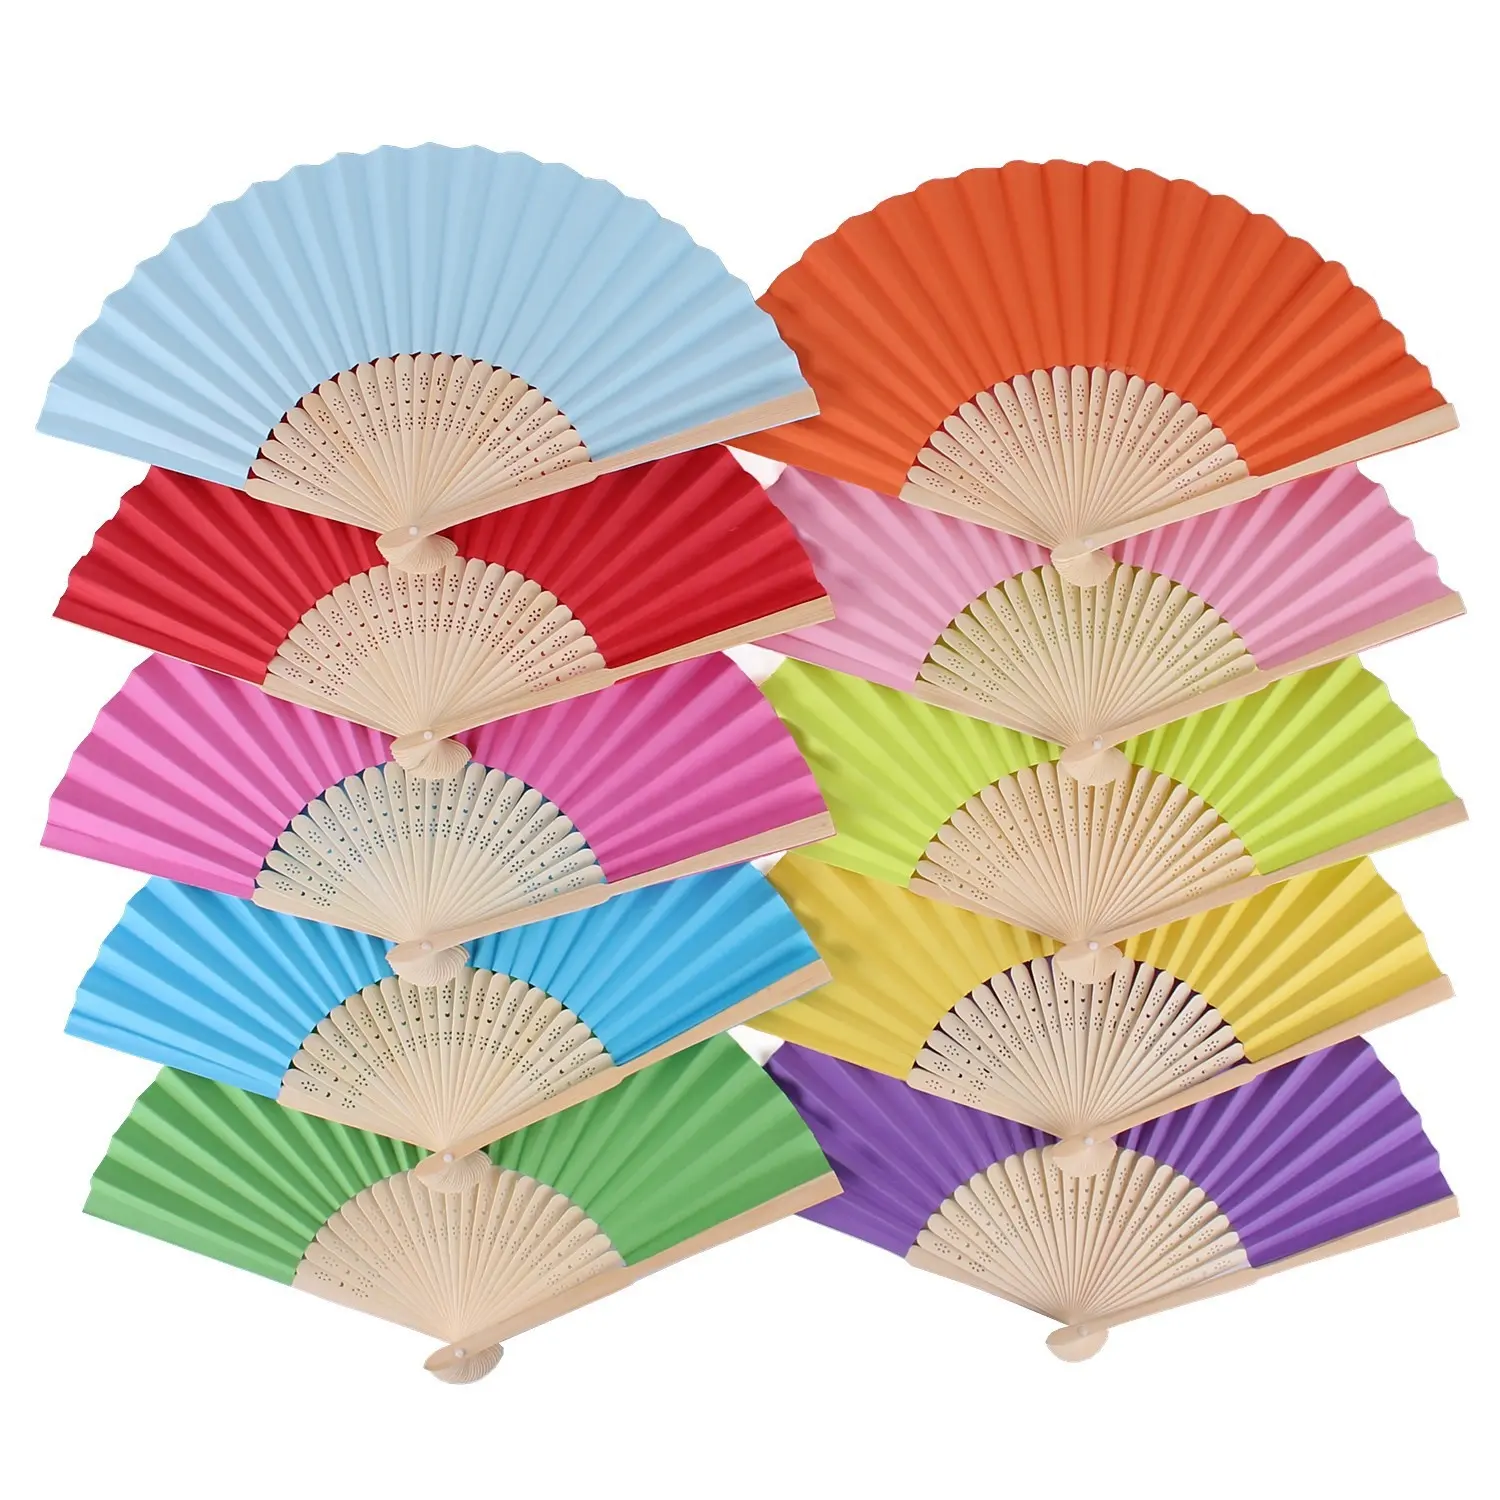 Bamboo Crafts Multicolor Wooden Hand Fan Chinese Fans Handheld Folded Fan For Wedding Party And Home Decoration